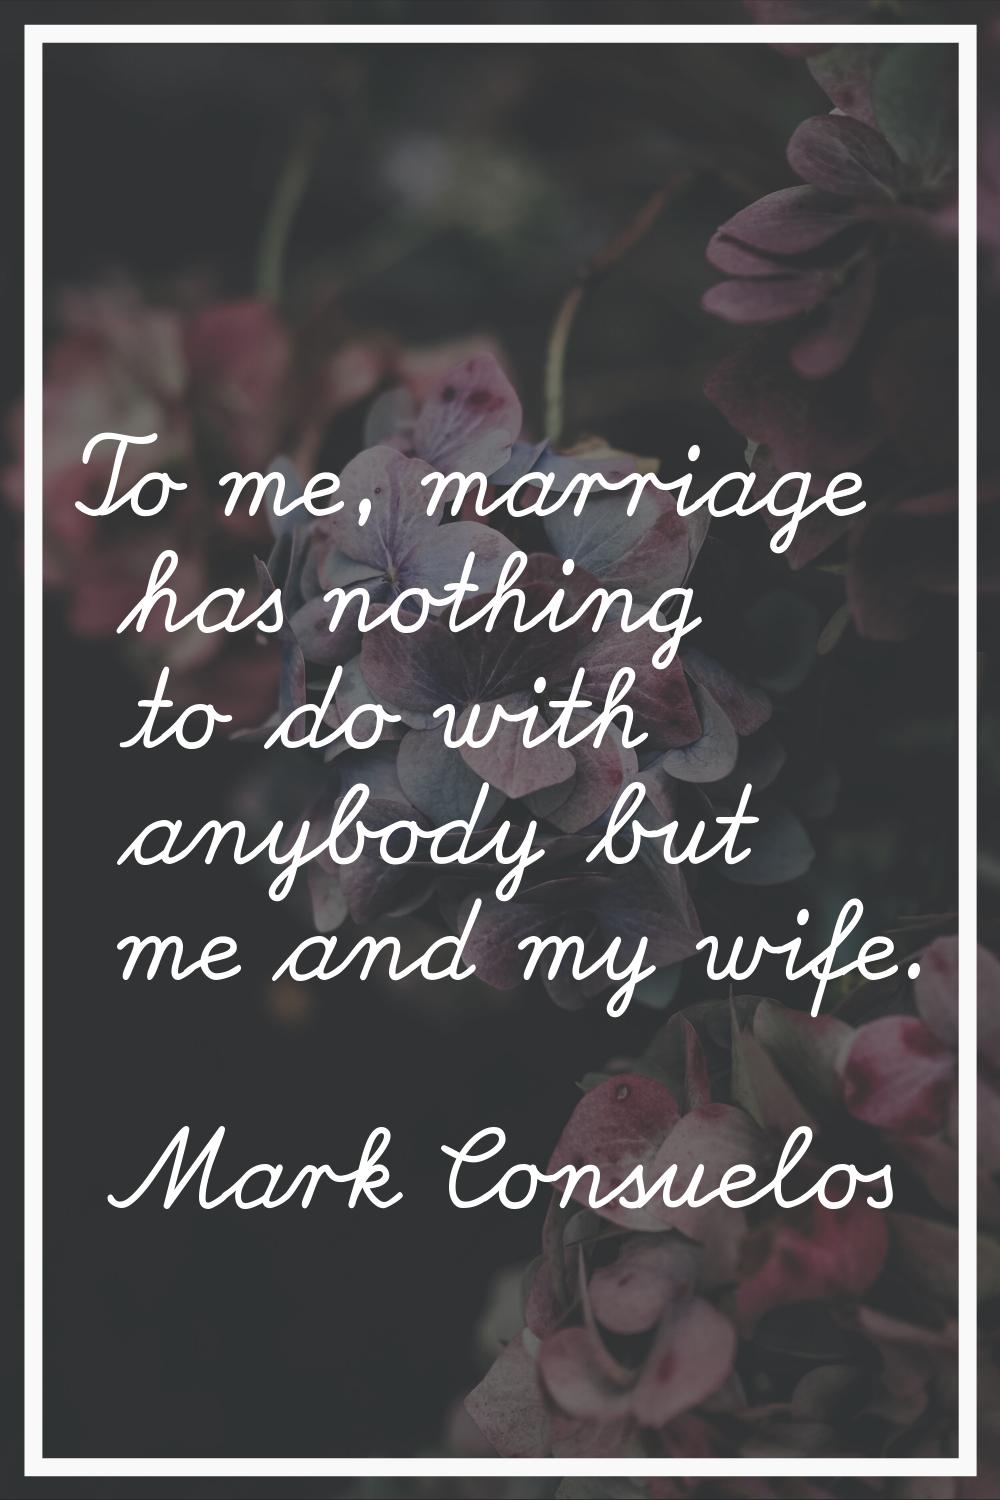 To me, marriage has nothing to do with anybody but me and my wife.